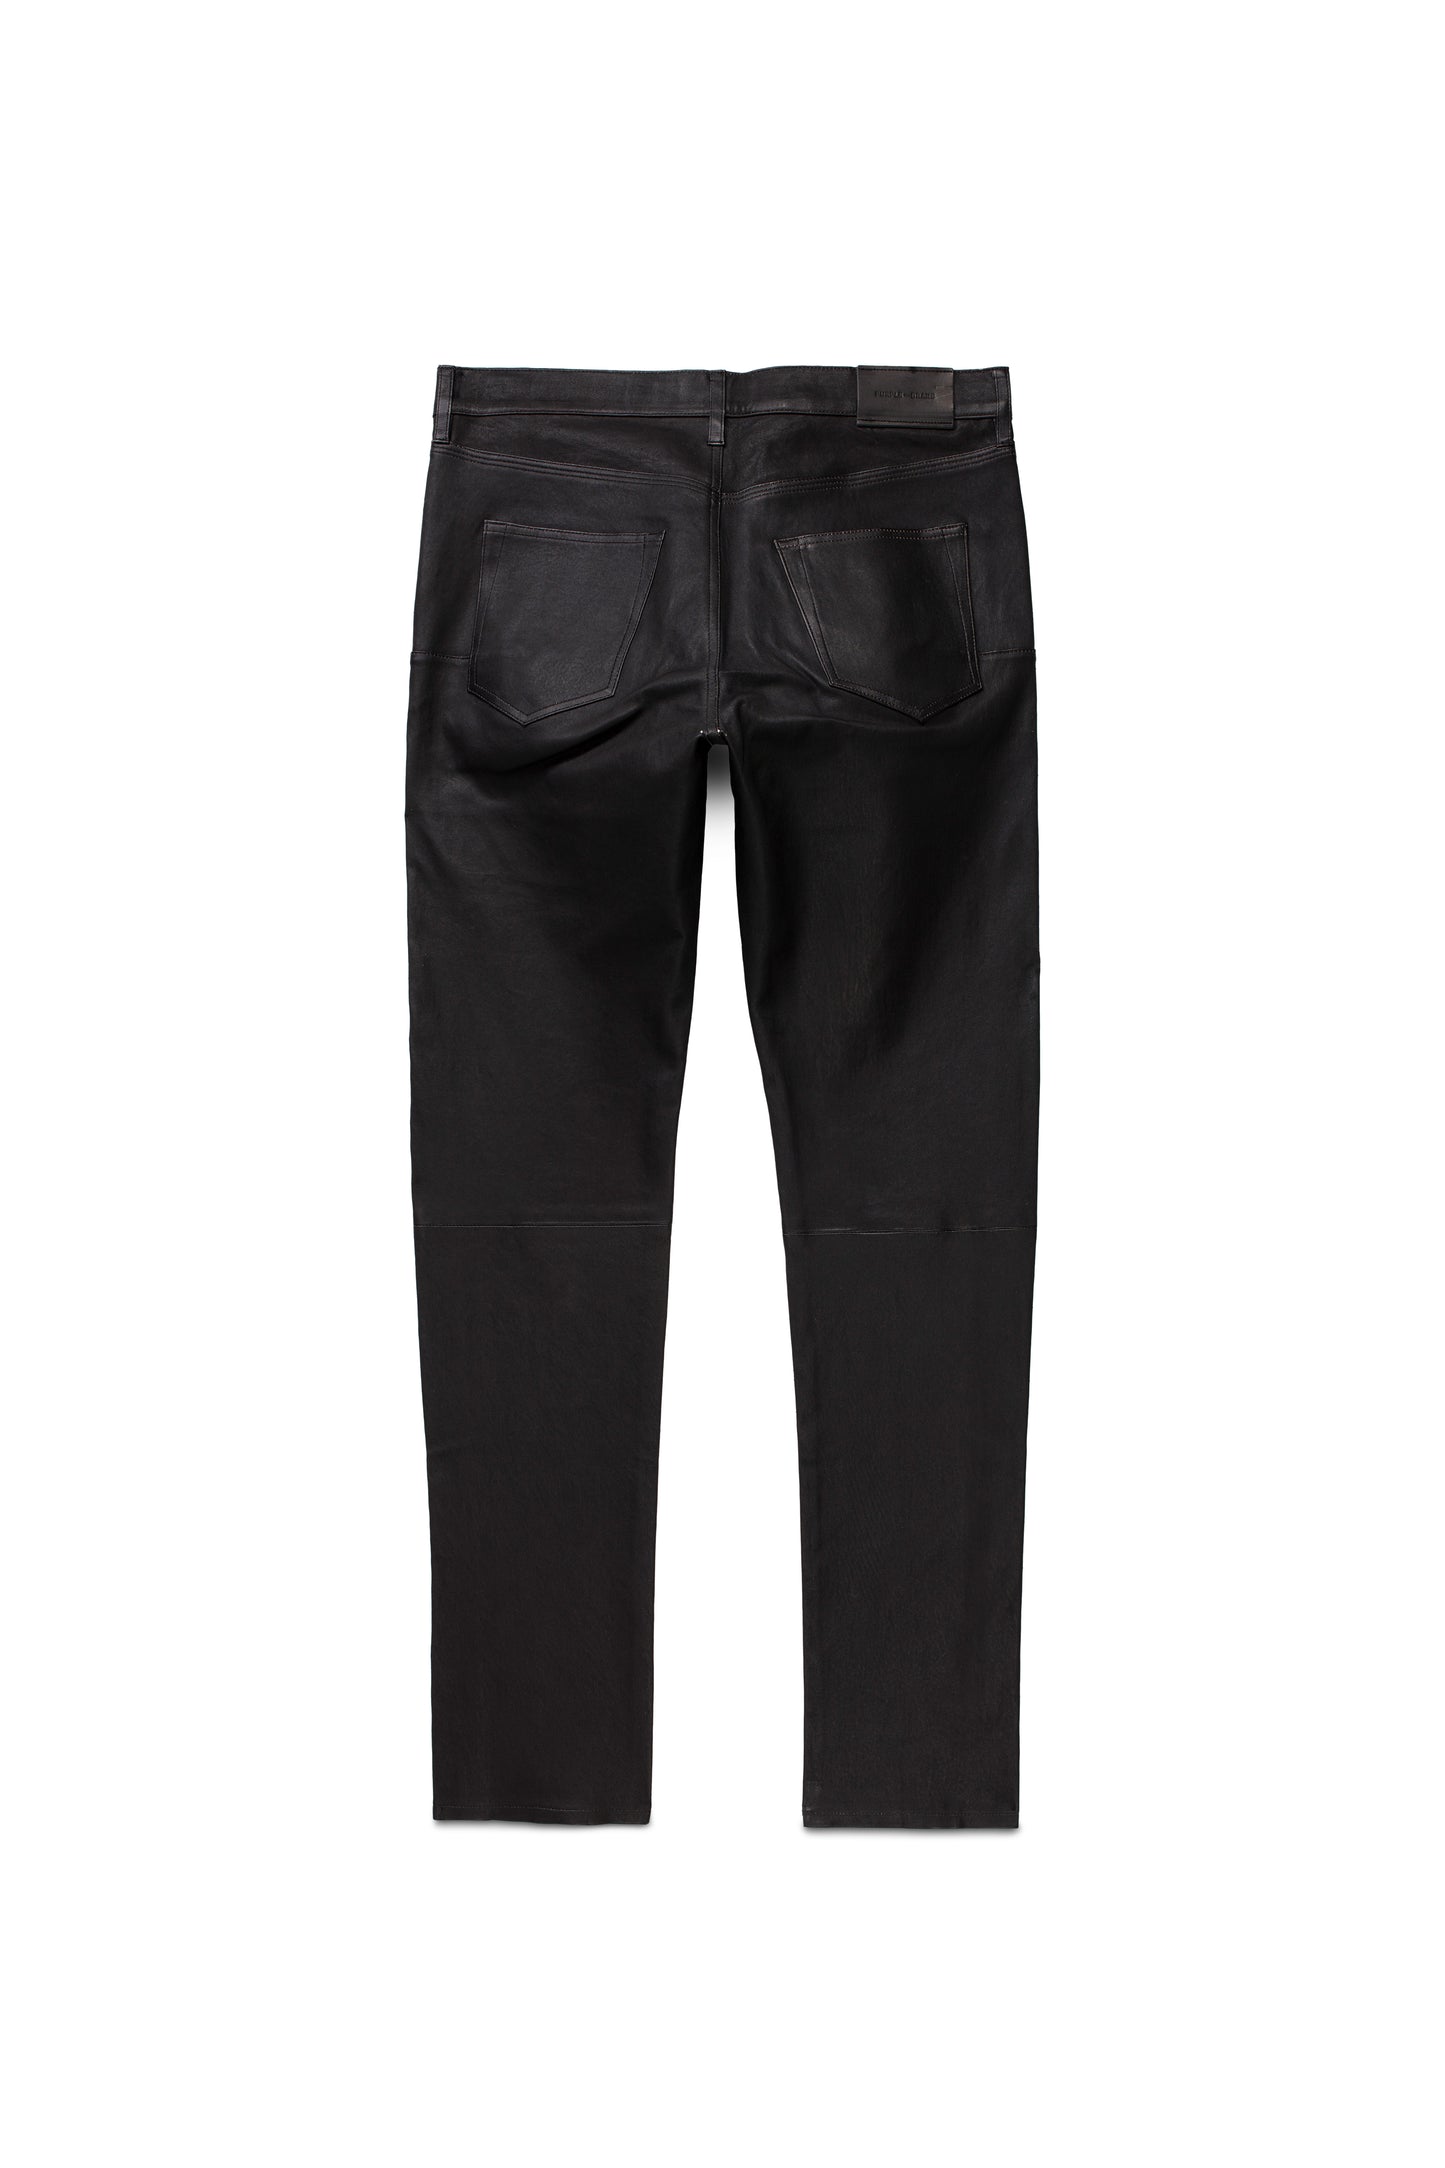 P001 LOW RISE SKINNY PANT - Stretch Leather Black Beauty